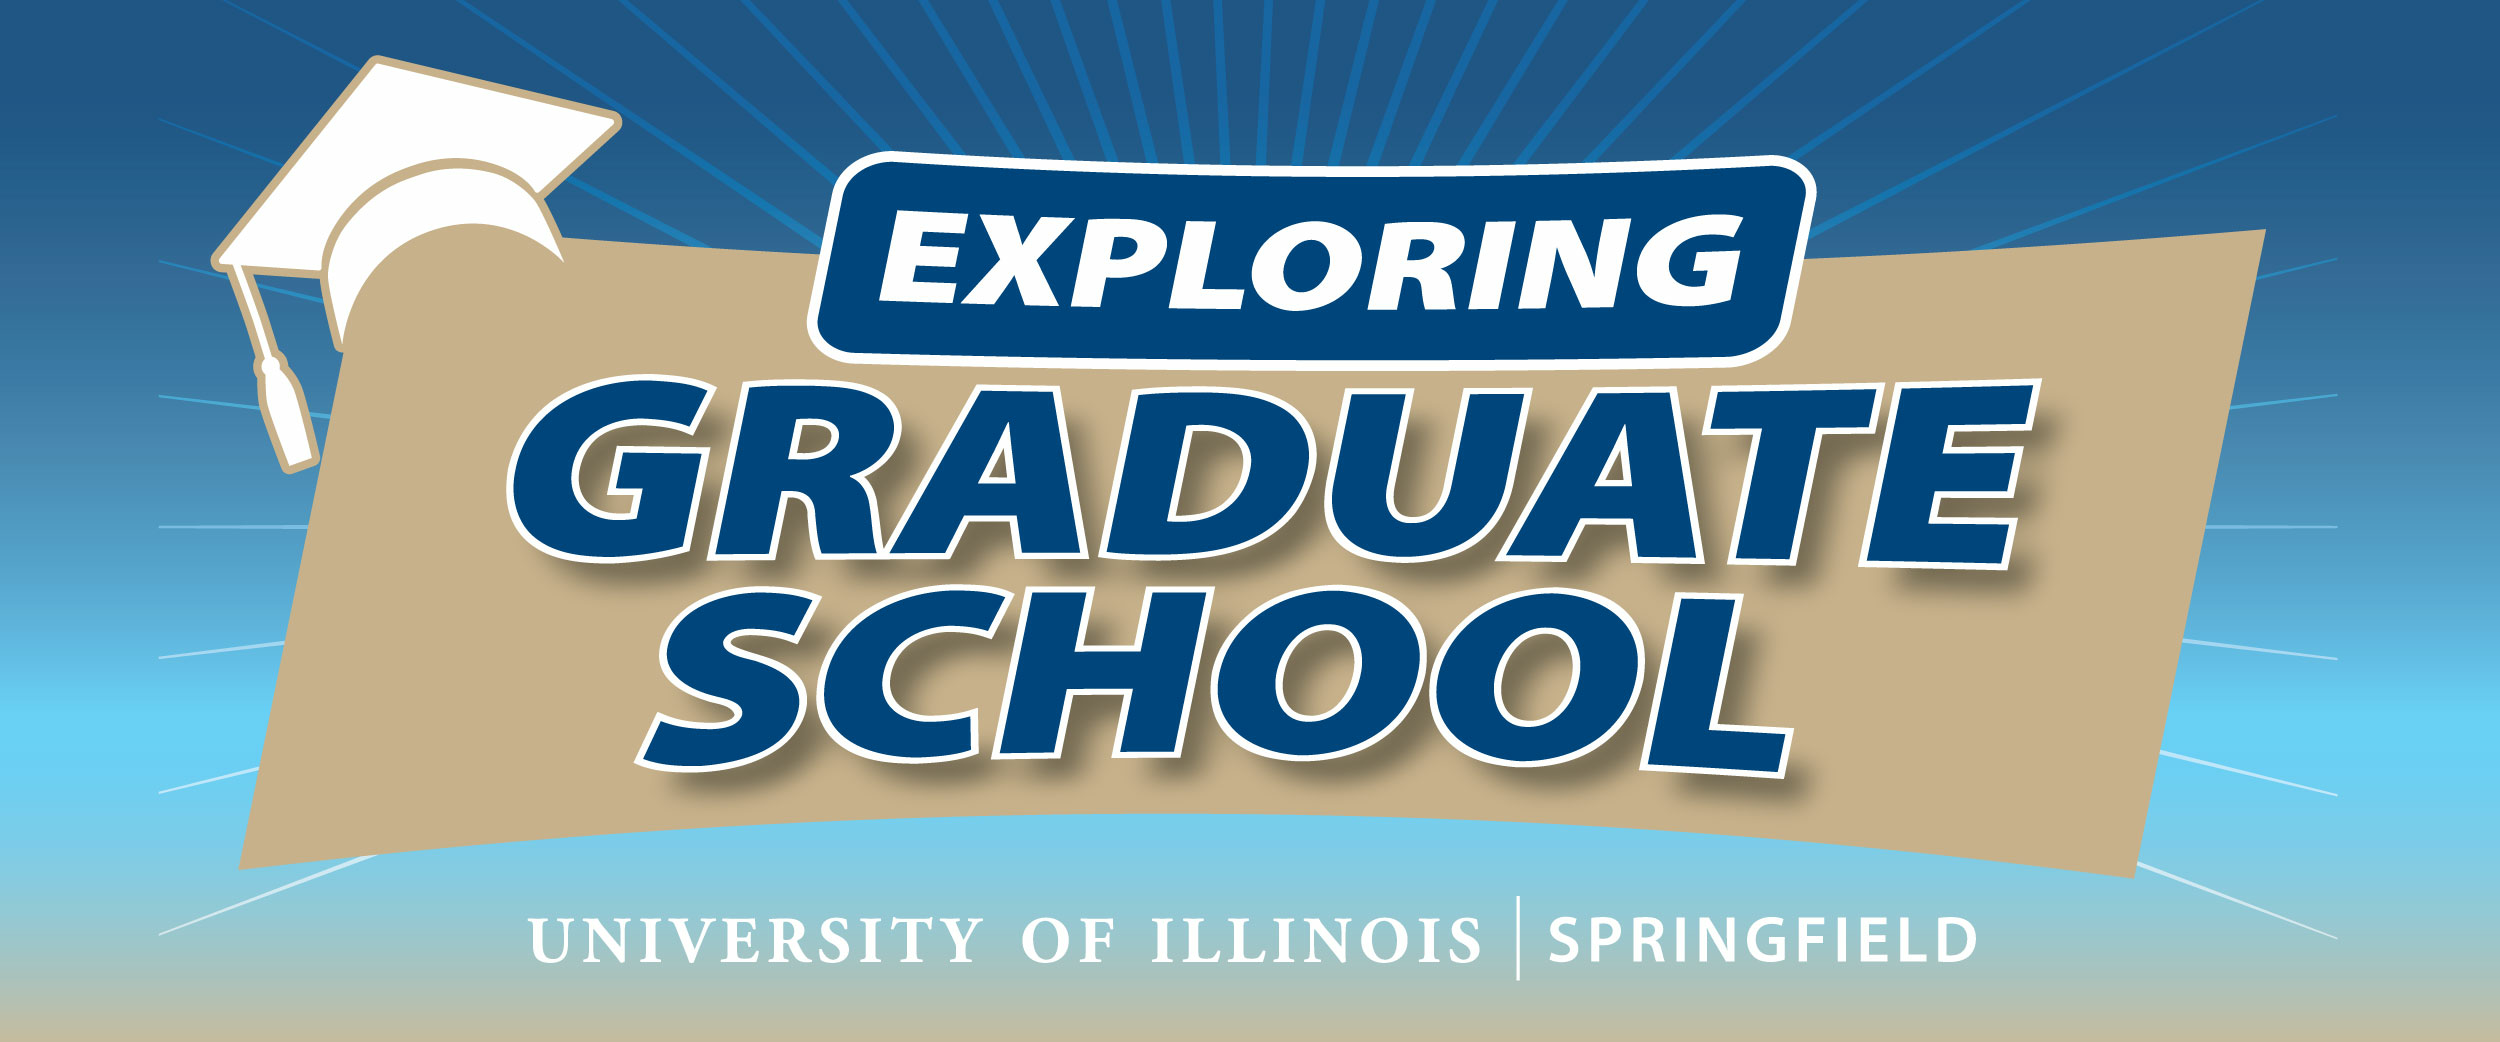 image is grad school banner for advertising purposes